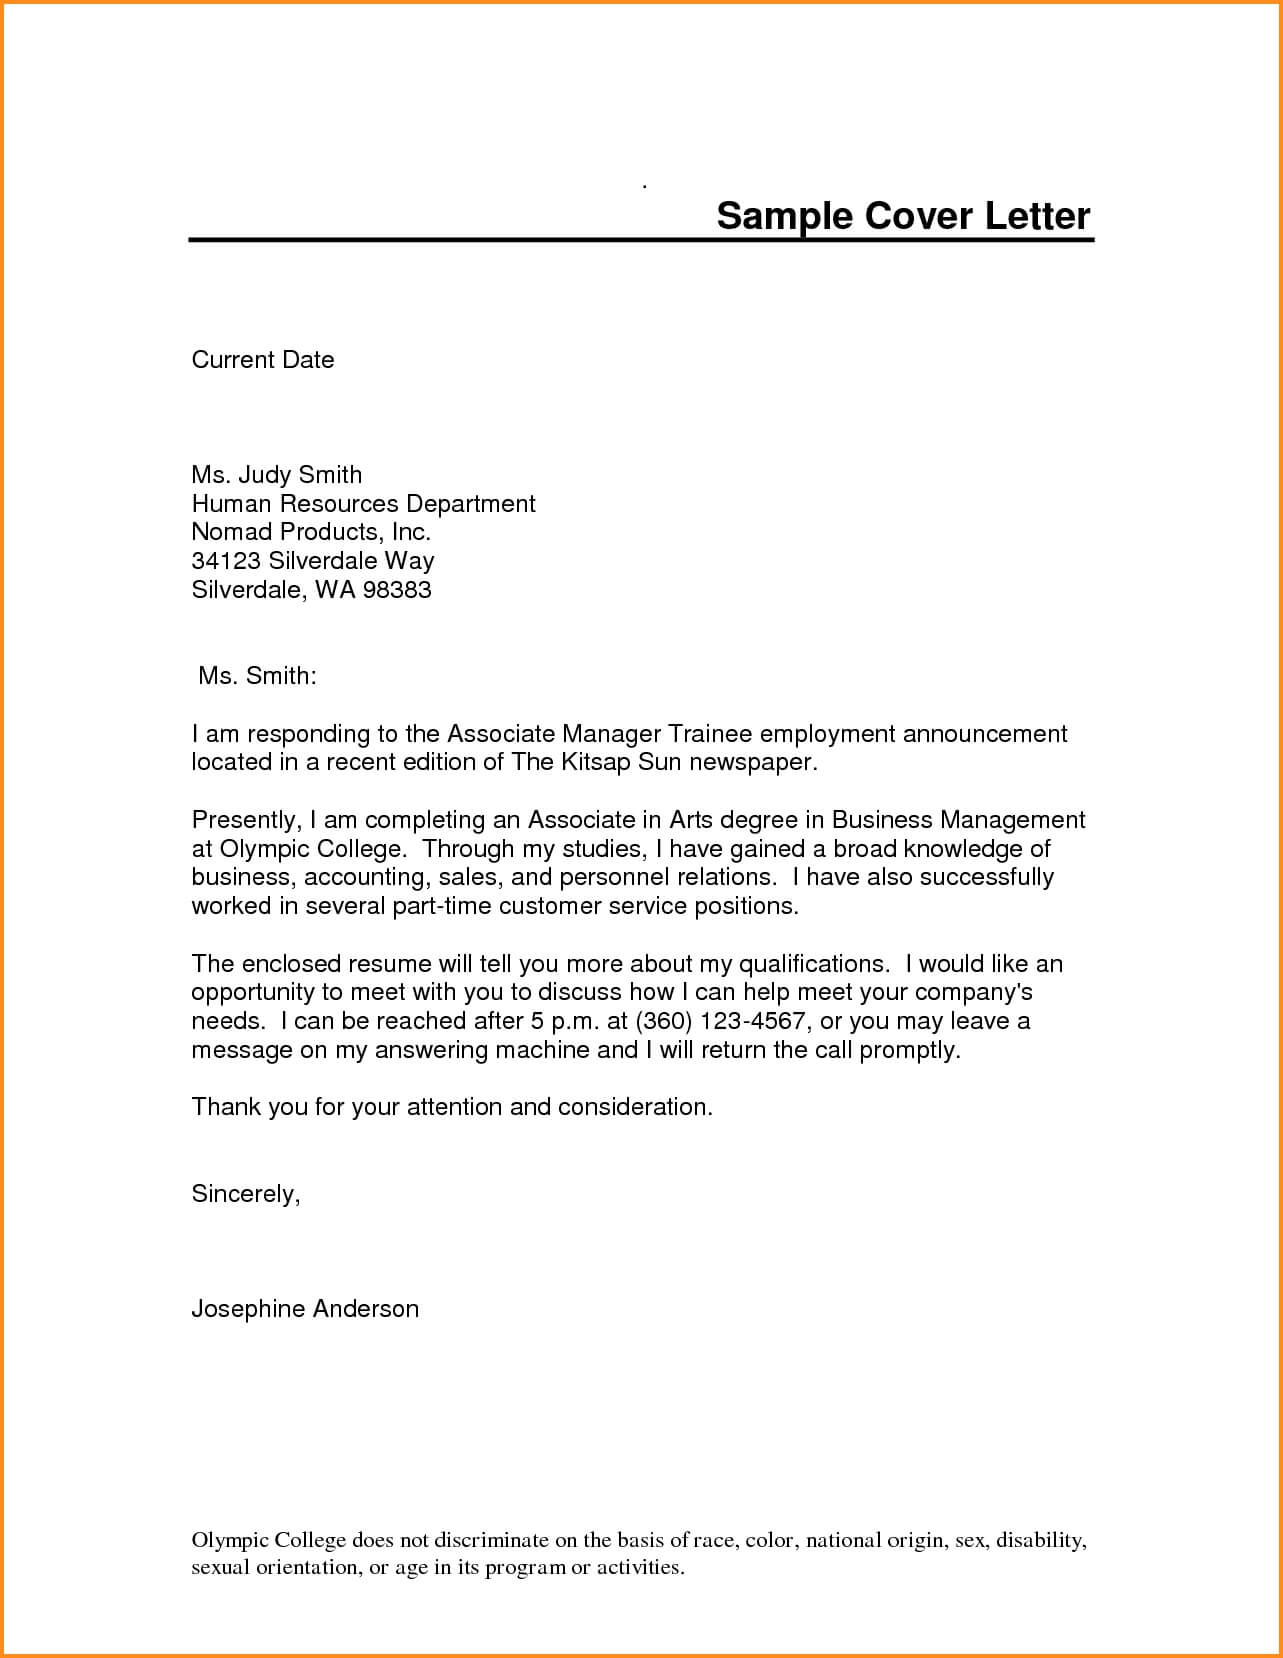 019 Letter Of Interest Template Microsoft Word Free Resume Intended For Letter Of Interest Template Microsoft Word